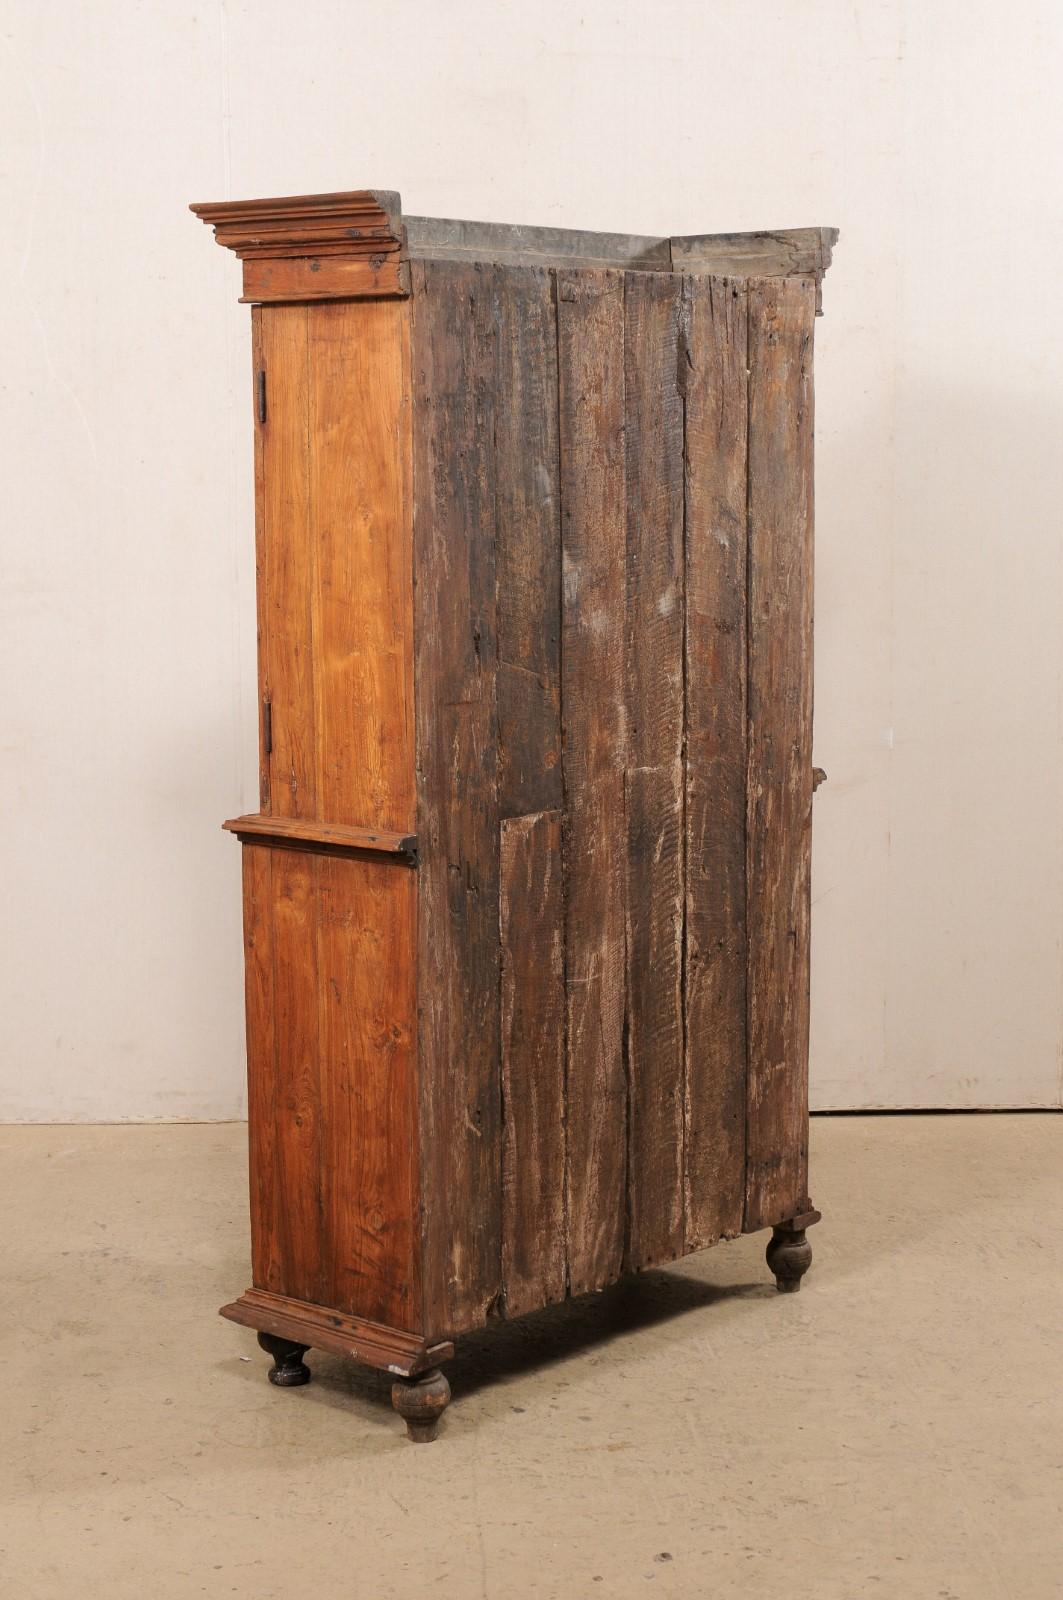 Tall British Colonial Teak-Carved Cabinet W/ Beautifully Carved Doors, 19th C 1